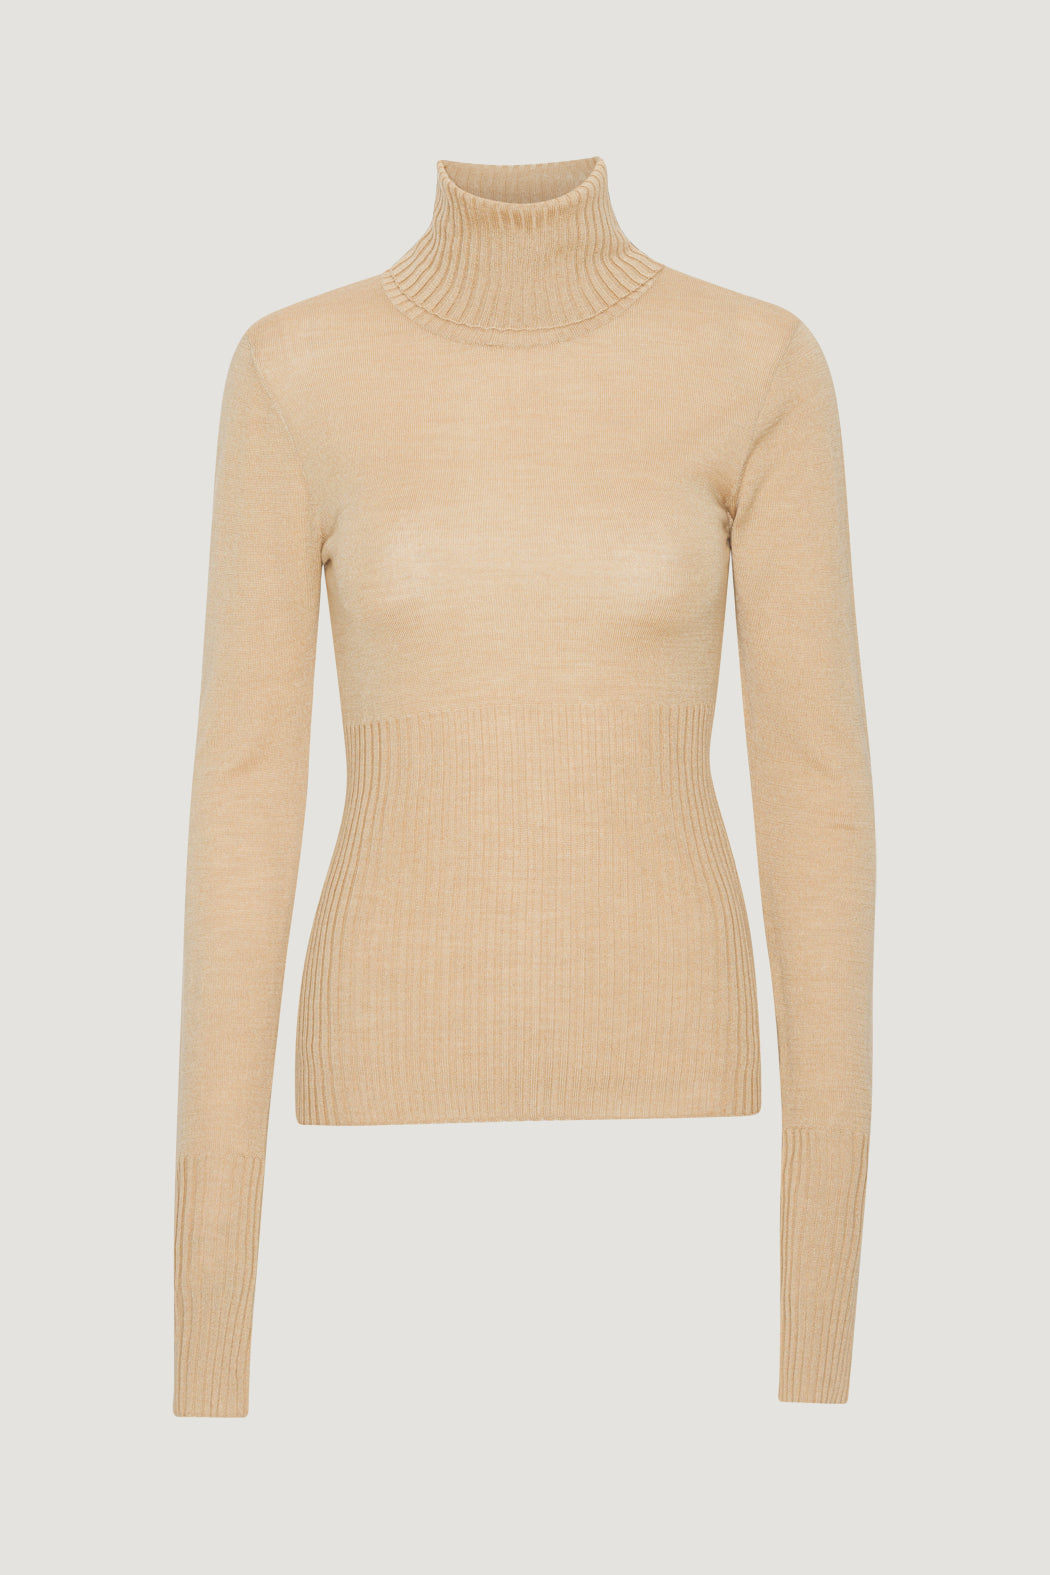 Remain Sheer Knit Sweater